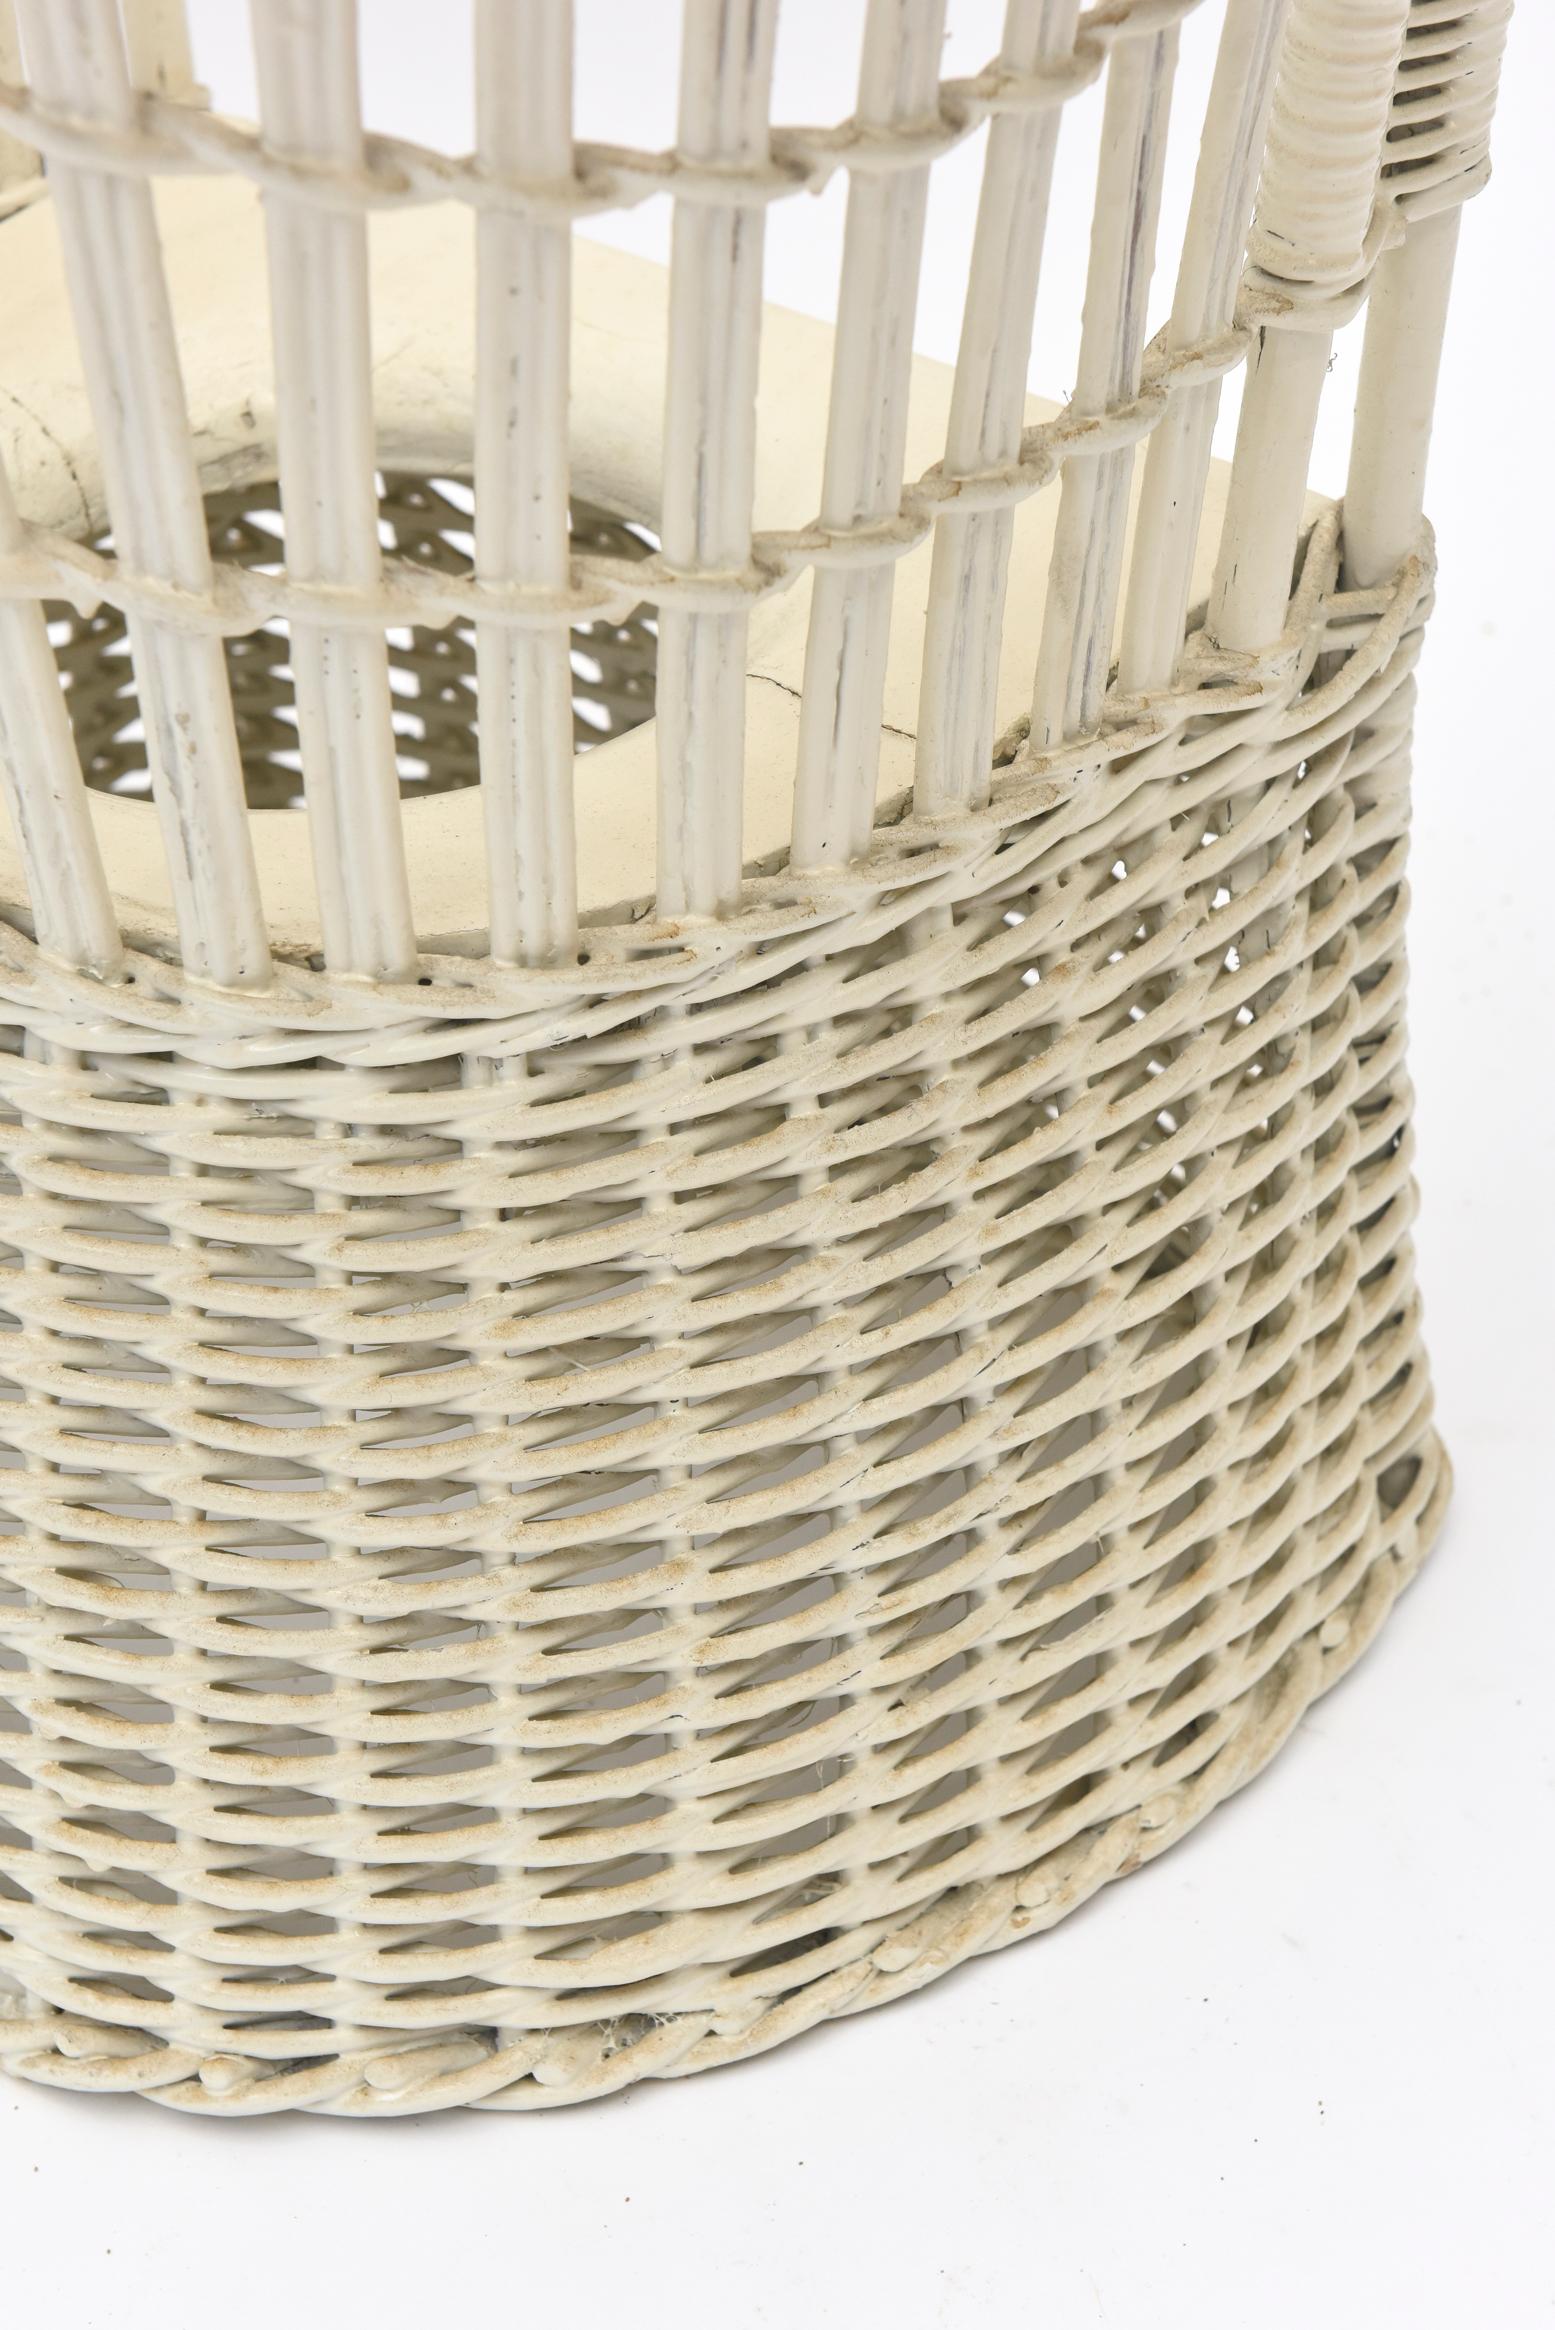 Woven Mid-20th Century Wicker Potty Seat For Sale